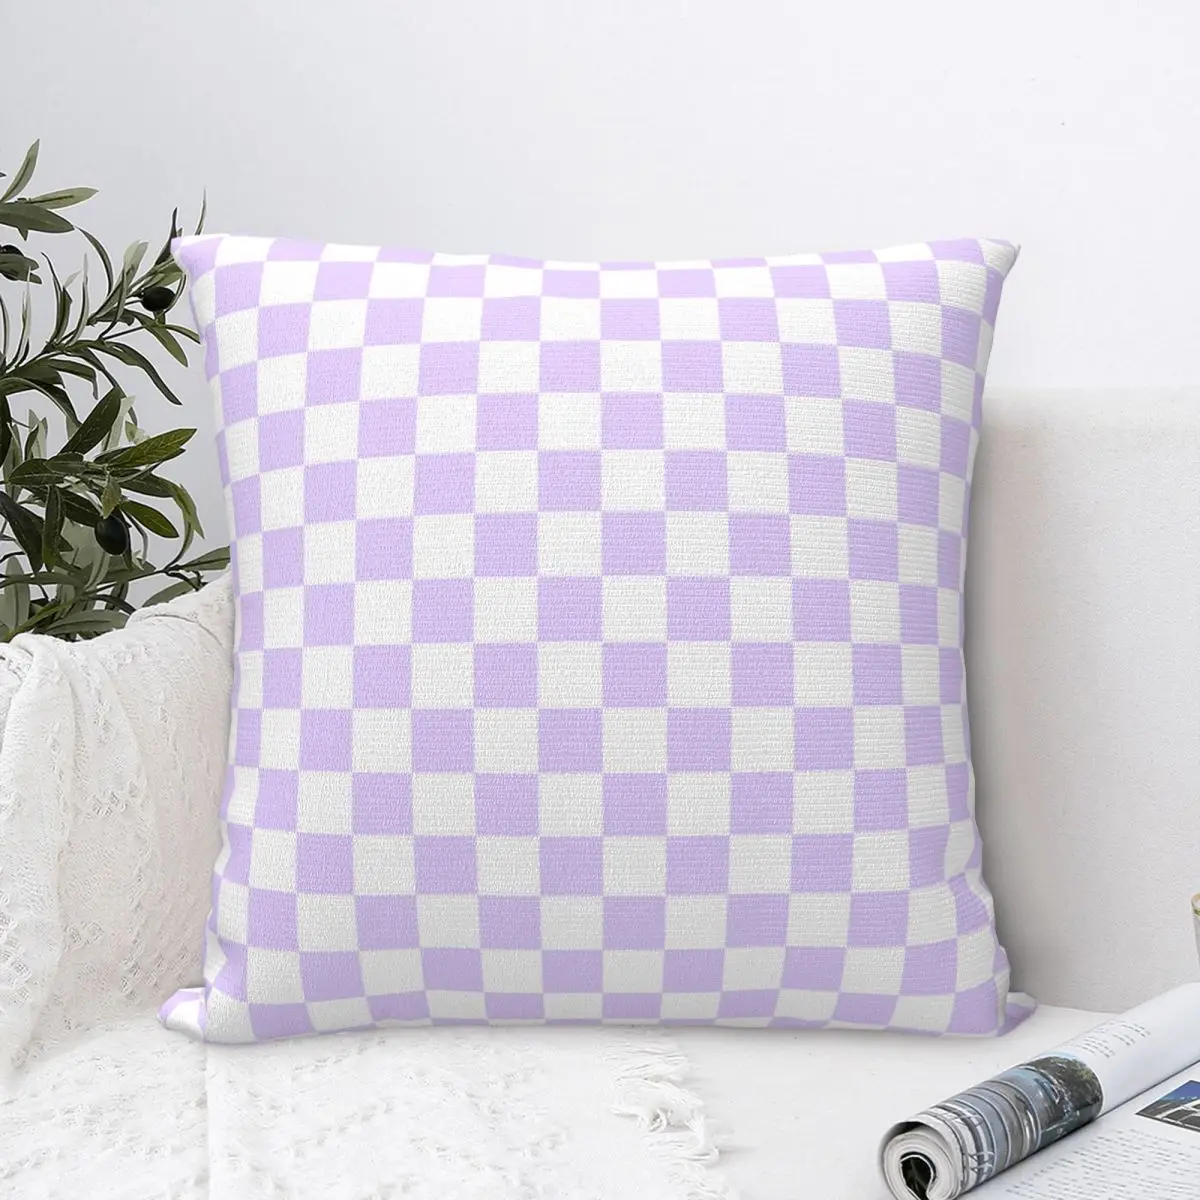 

Check V - Lilac Twist Case Of Pillowcases Cushion Cover Decorative Pillows For Sofa Girl's Heart Fresh the leisure Not deformed